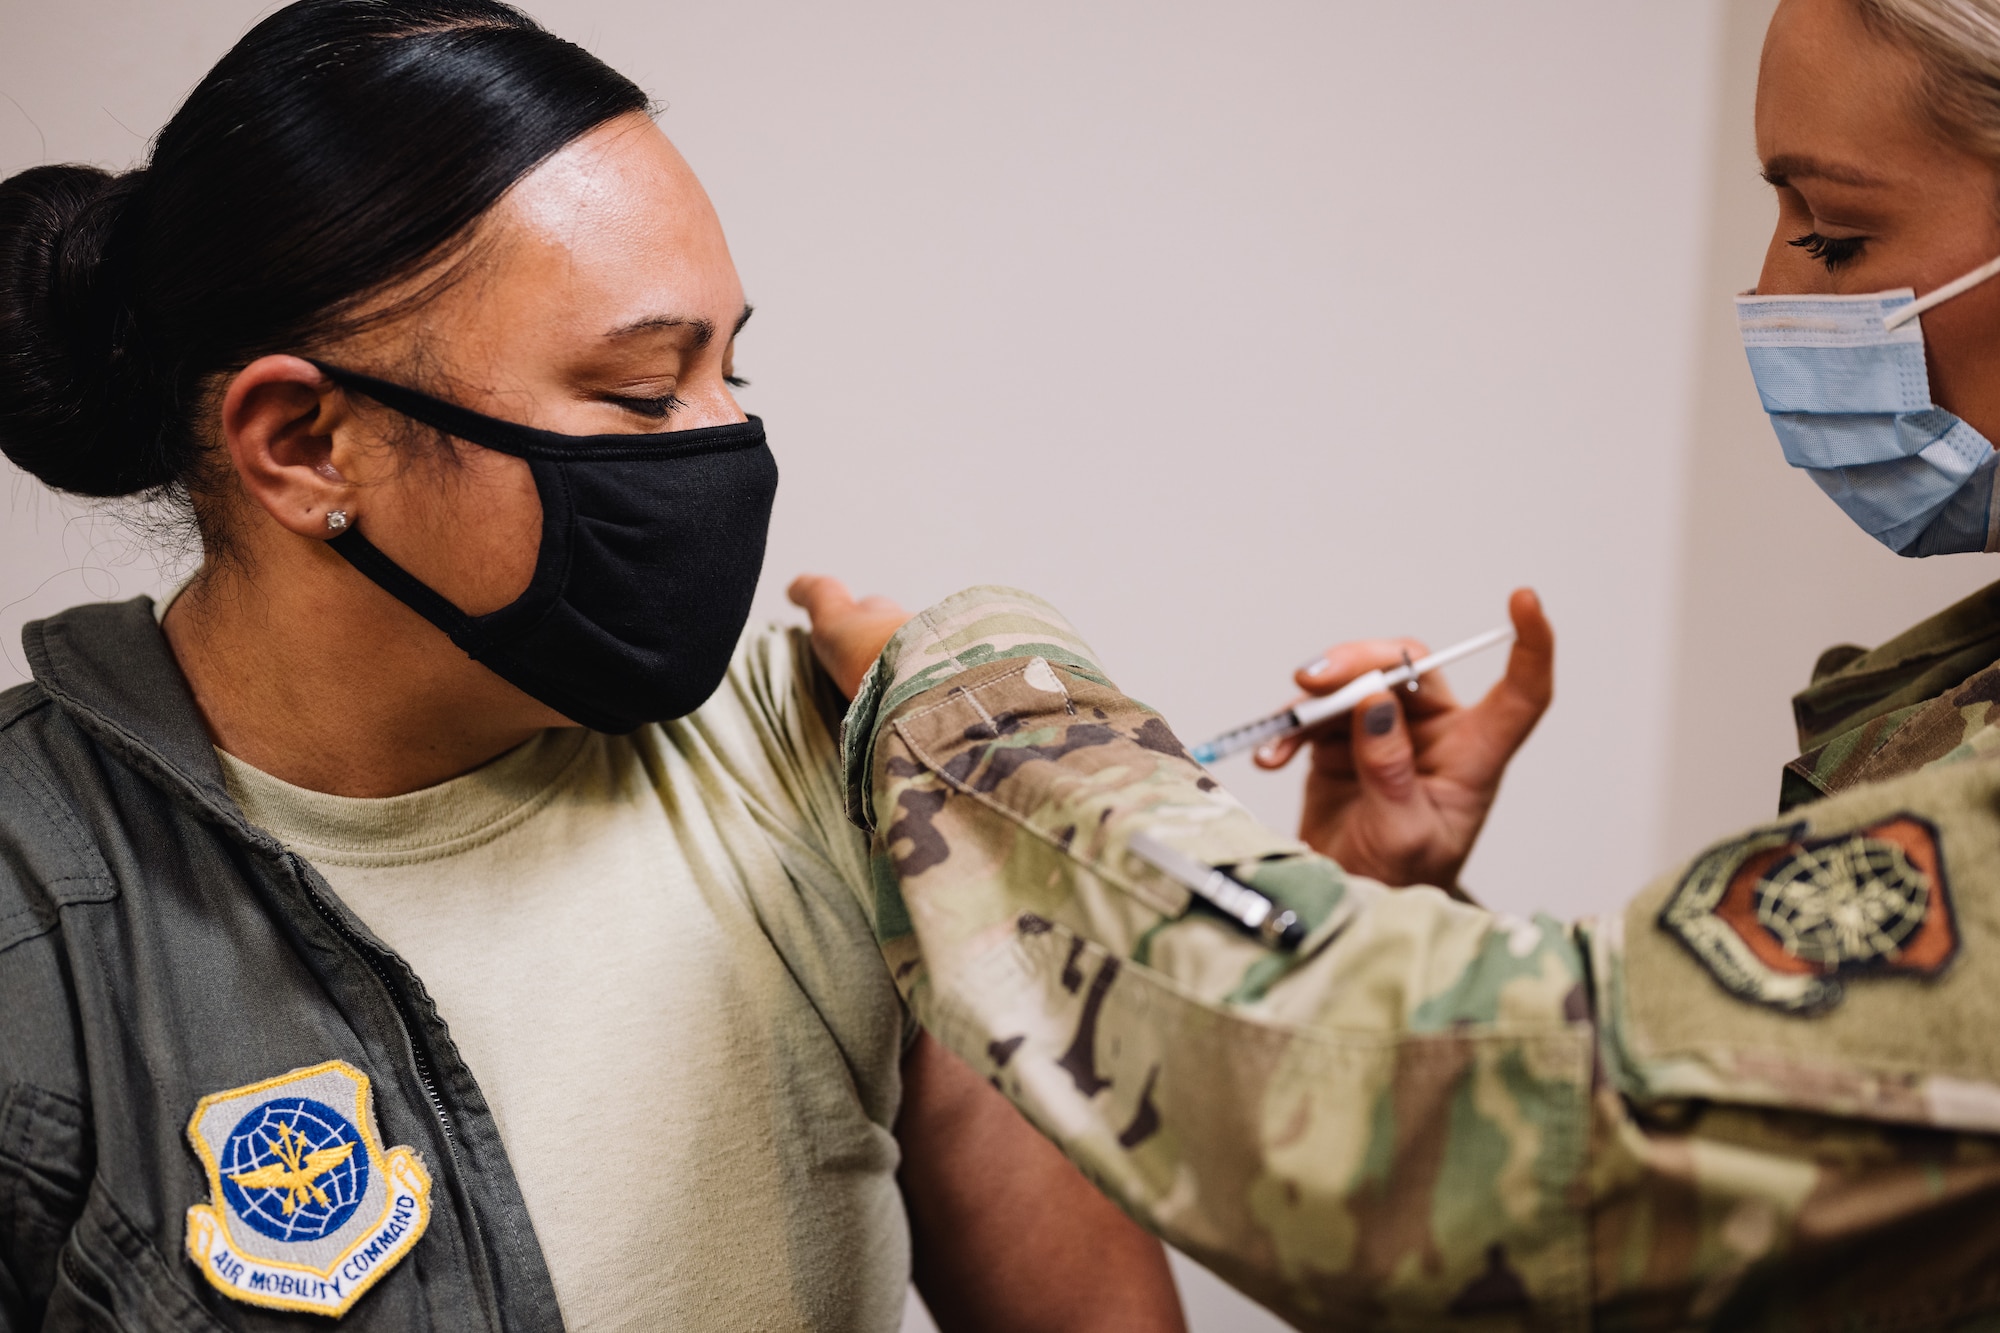 Master Sgt. Renee Cheatham, 375th Aeromedical Evacuation Squadron aeromedical evacuation technician, receives one the first COVID-19 inoculations on Scott Air Force Base, Ill., Jan 6, 2021. The COVID-19 vaccines will be available on a voluntary basis in which early vaccination participation is highly encouraged for priority personnel; masks and physical distancing will still be necessary until a large proportion of the population is vaccinated and the vaccine is proven to provide long-term protection. (U.S. Air Force photo by Tech. Sgt. Jordan Castelan)